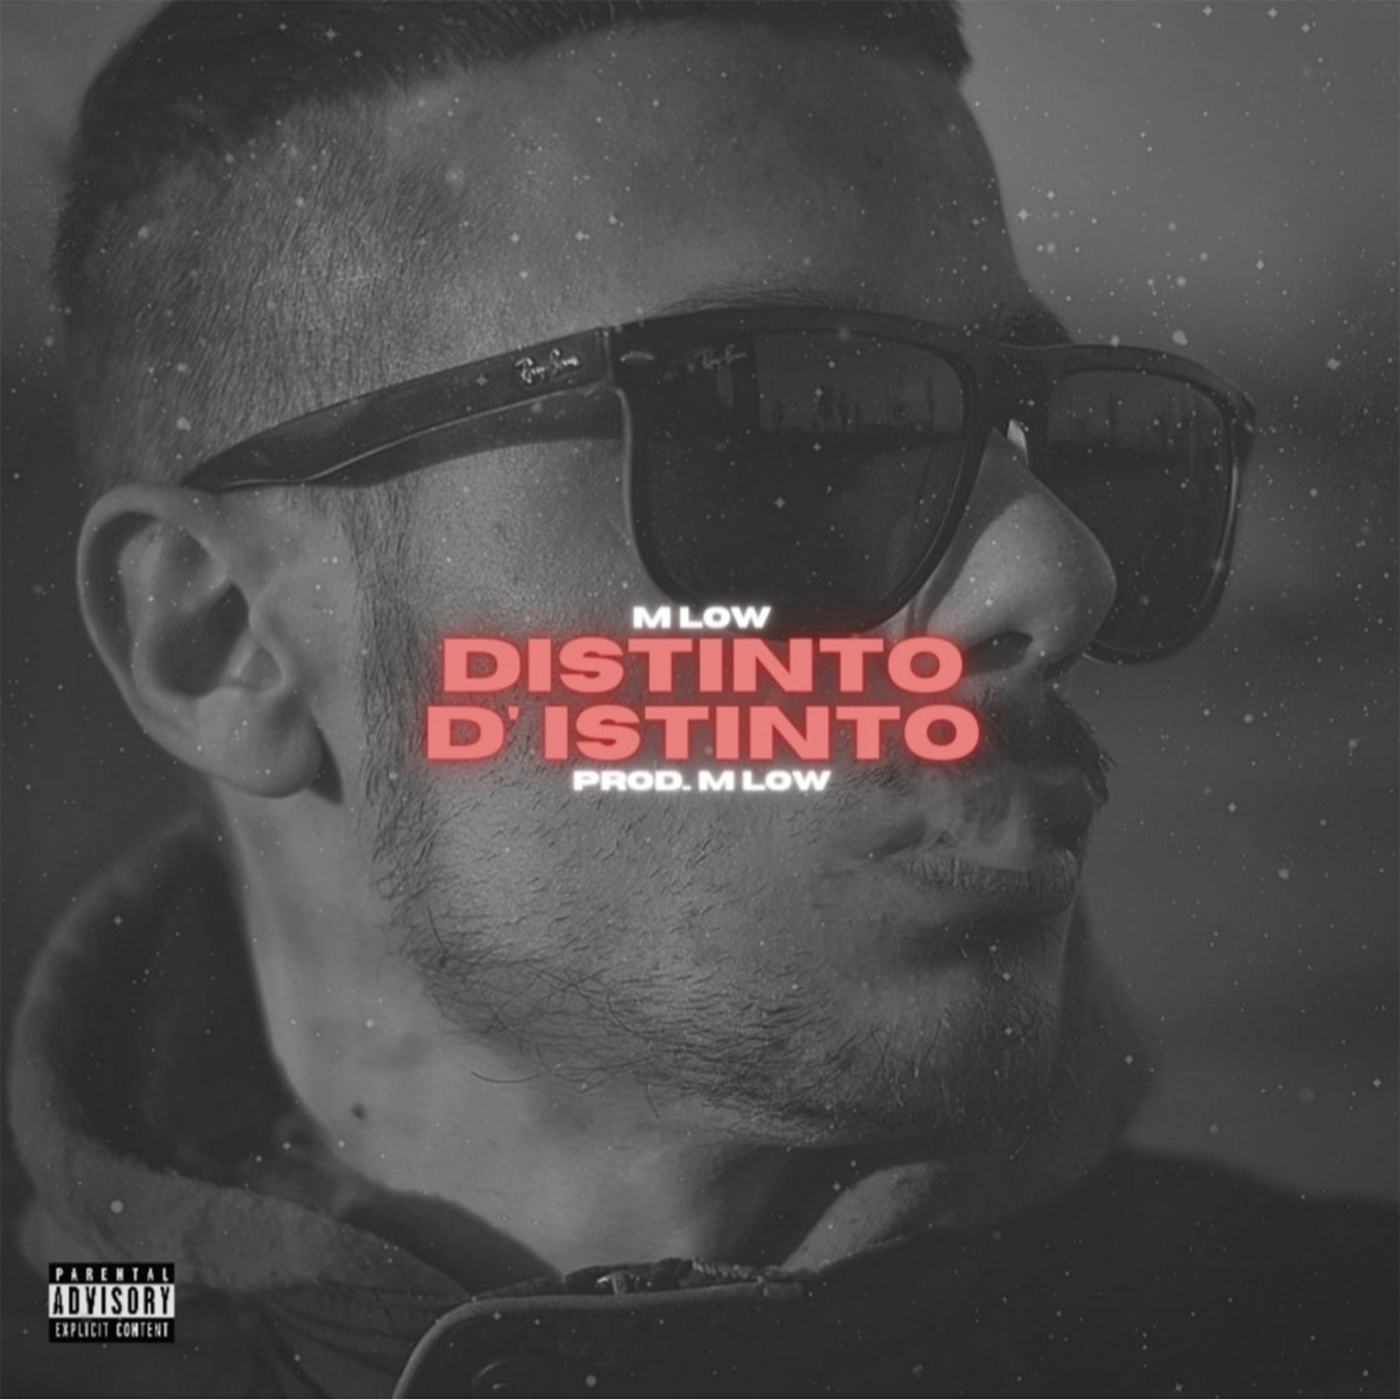 “Distinto d’istinto” by M Low